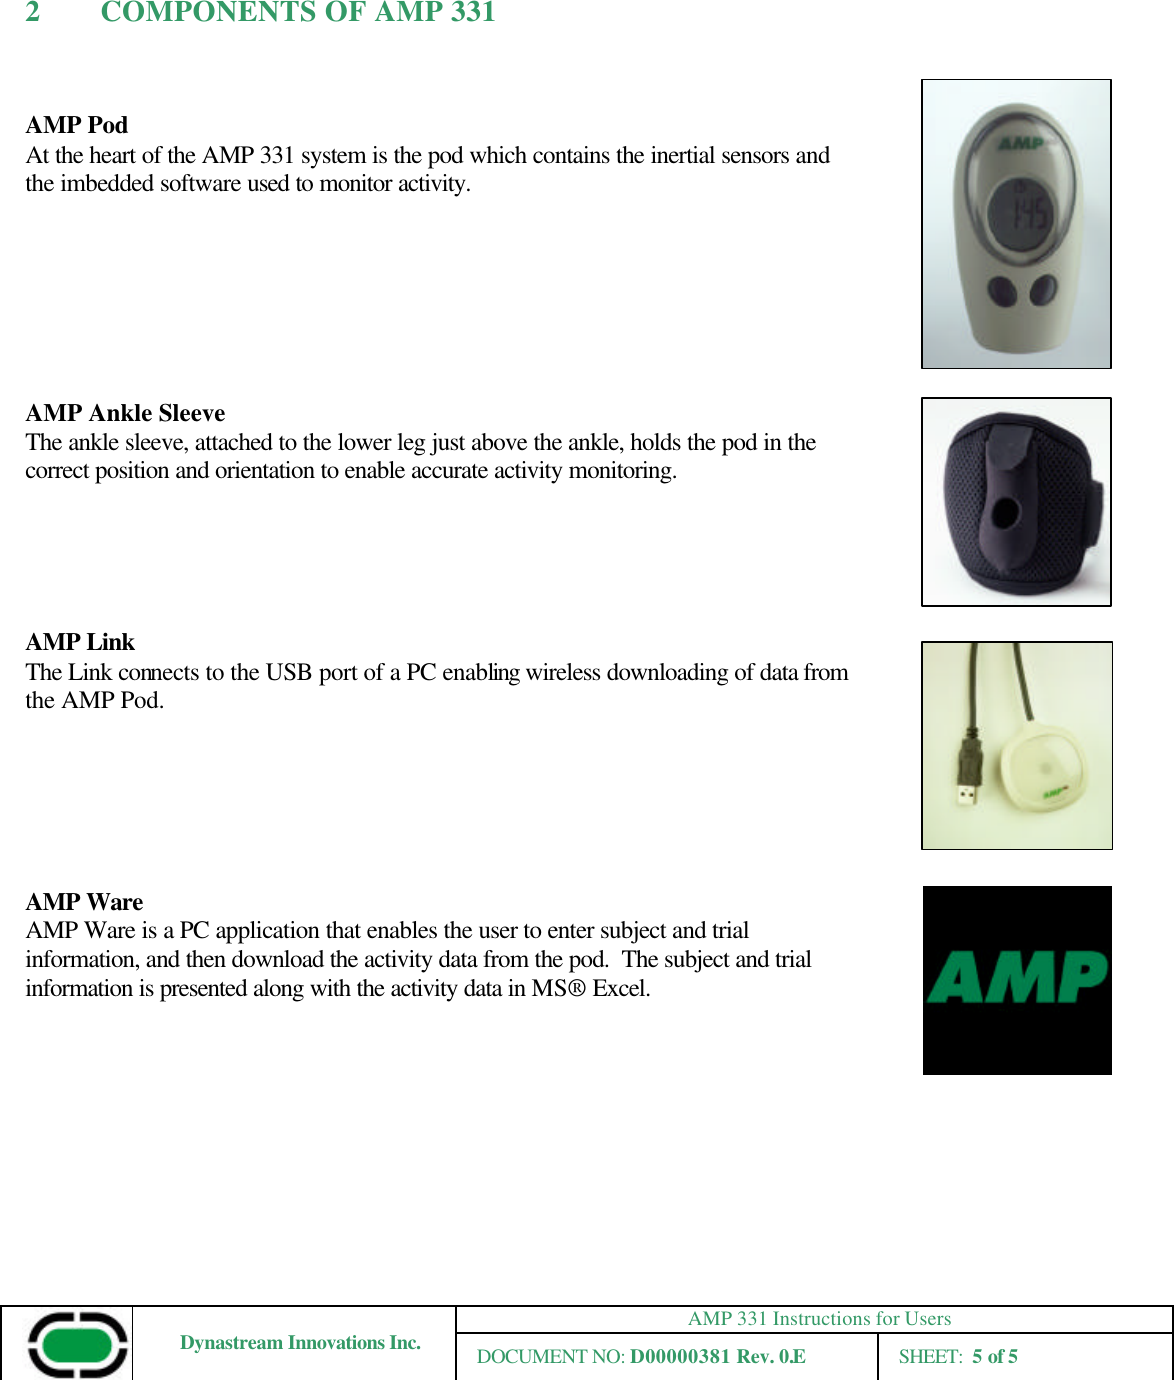 AMP 331 Instructions for Users Dynastream Innovations Inc. DOCUMENT NO: D00000381 Rev. 0.E SHEET:  5 of 5  2 COMPONENTS OF AMP 331   AMP Pod  At the heart of the AMP 331 system is the pod which contains the inertial sensors and the imbedded software used to monitor activity.        AMP Ankle Sleeve The ankle sleeve, attached to the lower leg just above the ankle, holds the pod in the correct position and orientation to enable accurate activity monitoring.      AMP Link The Link connects to the USB port of a PC enabling wireless downloading of data from the AMP Pod.       AMP Ware AMP Ware is a PC application that enables the user to enter subject and trial information, and then download the activity data from the pod.  The subject and trial information is presented along with the activity data in MS® Excel.     